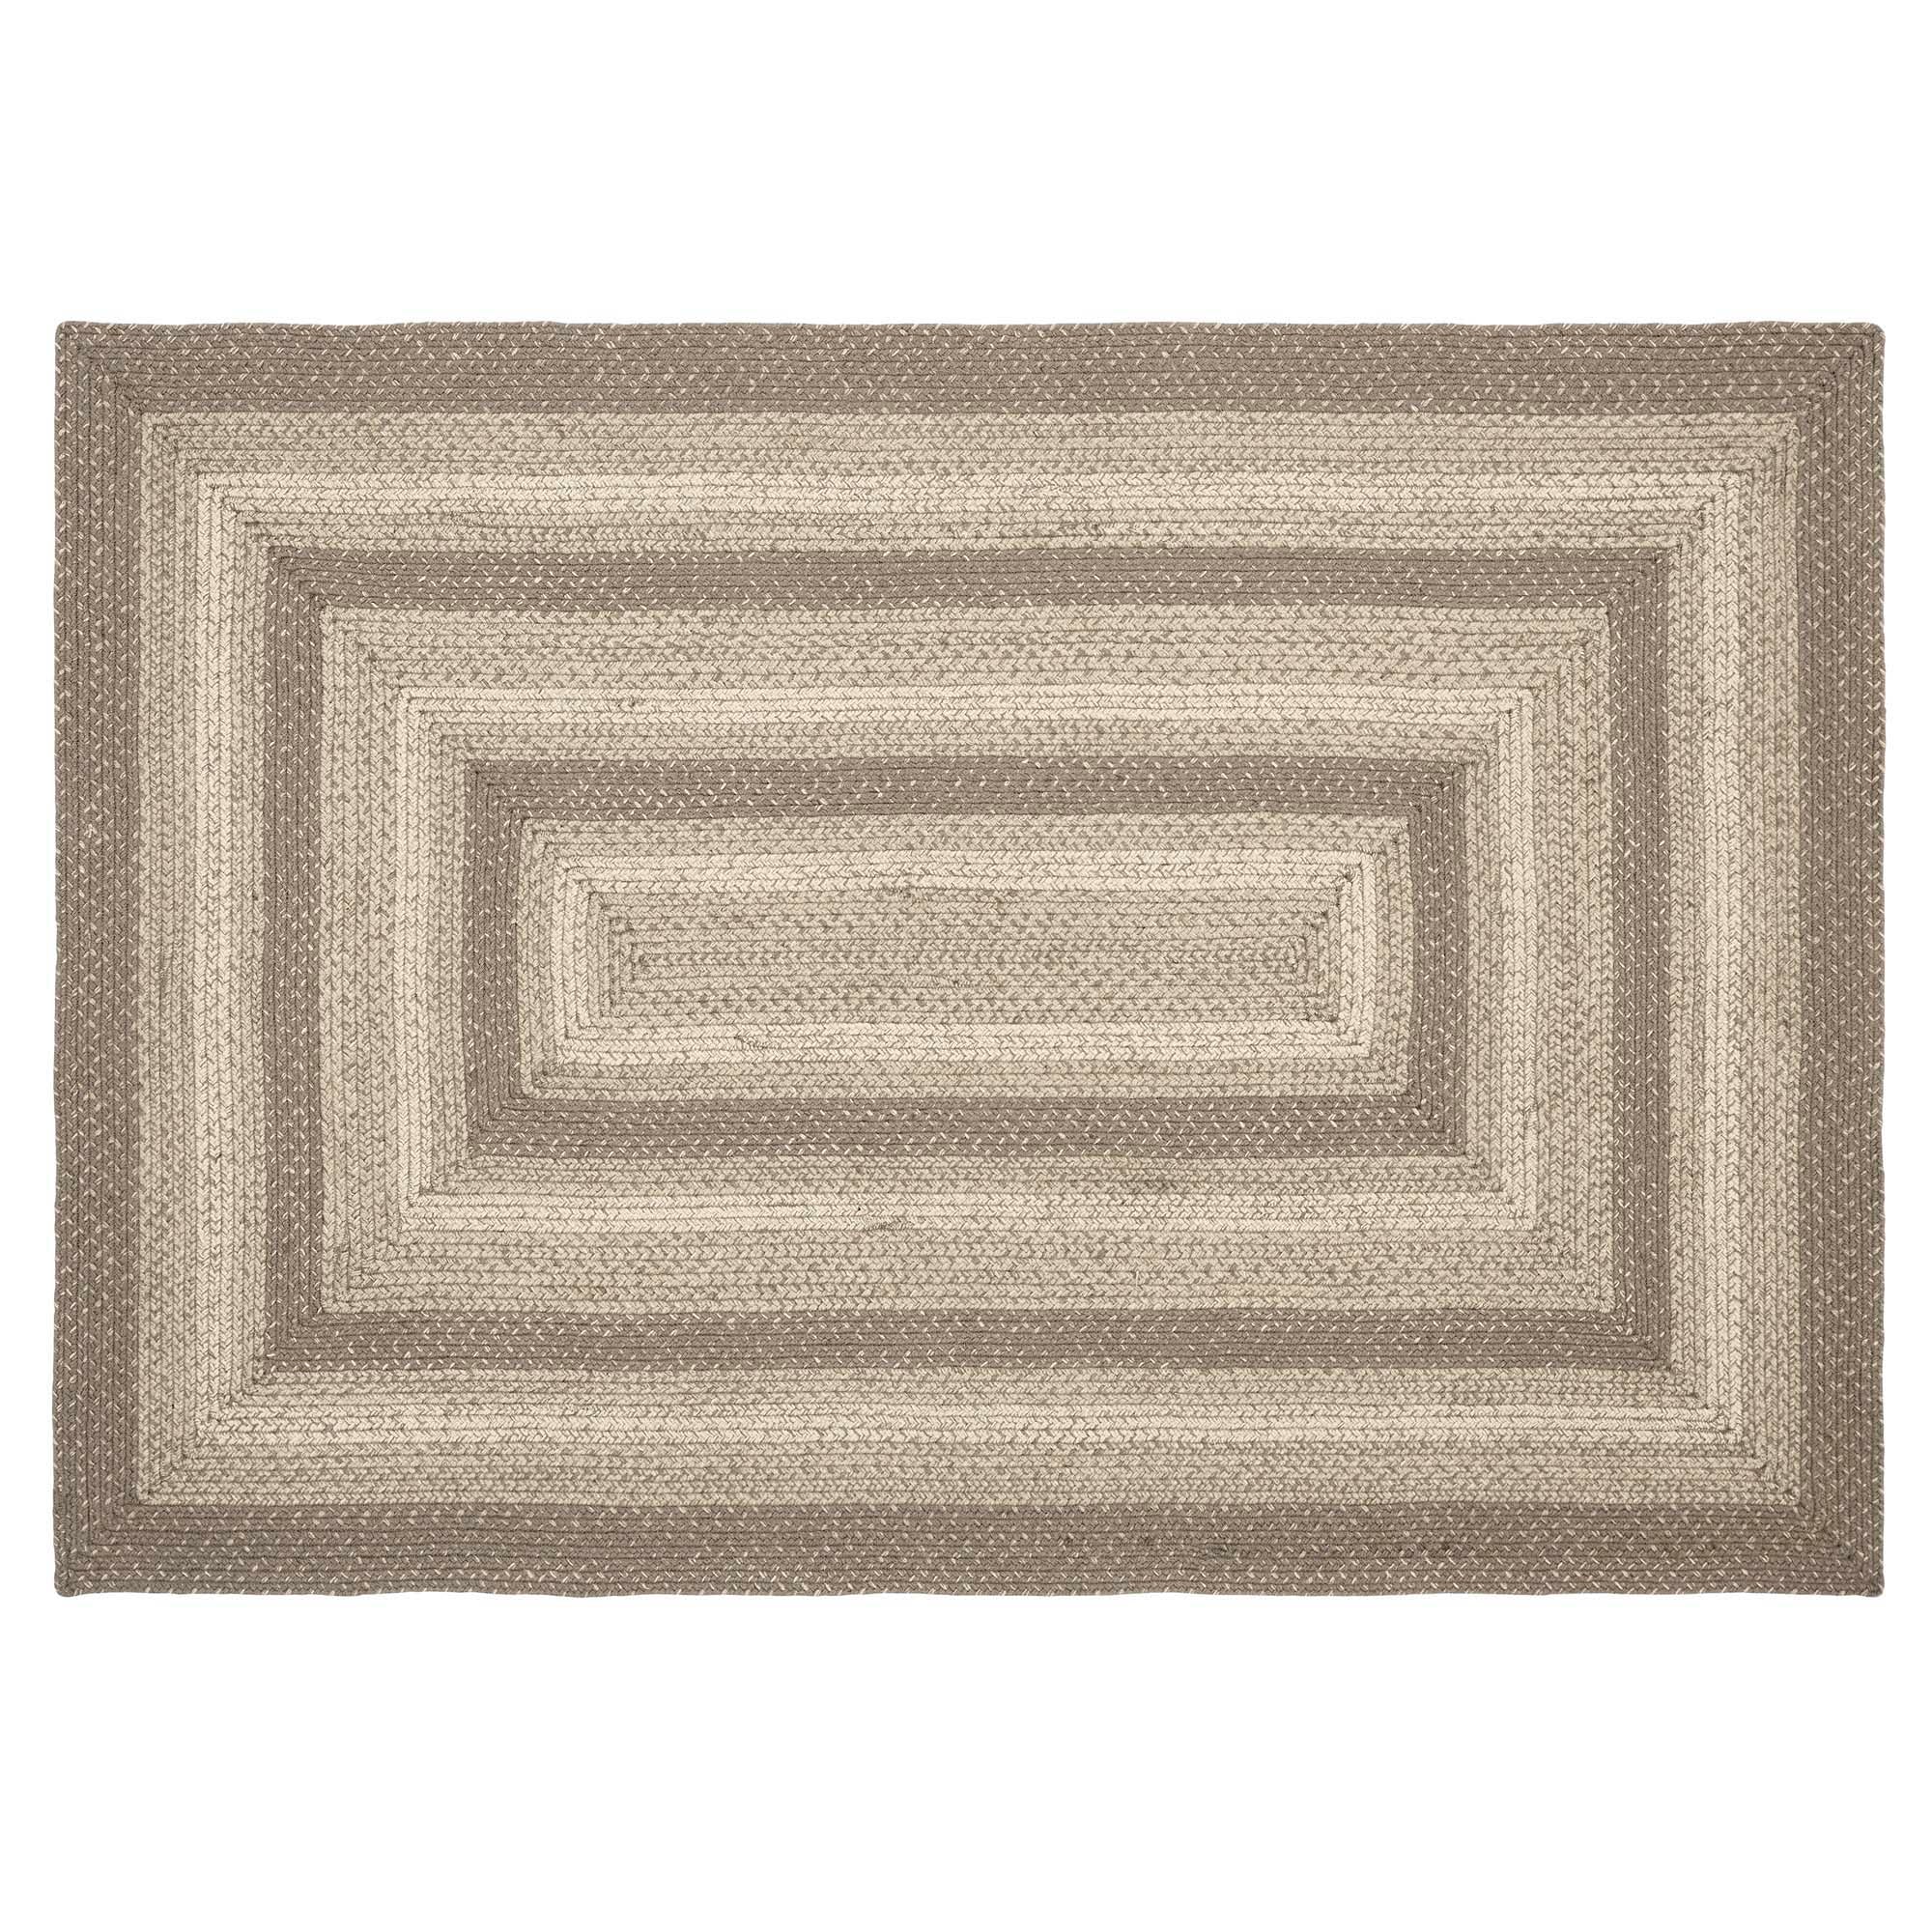 Cobblestone Jute Braided Rug Rect with Rug Pad 4'x6' VHC Brands